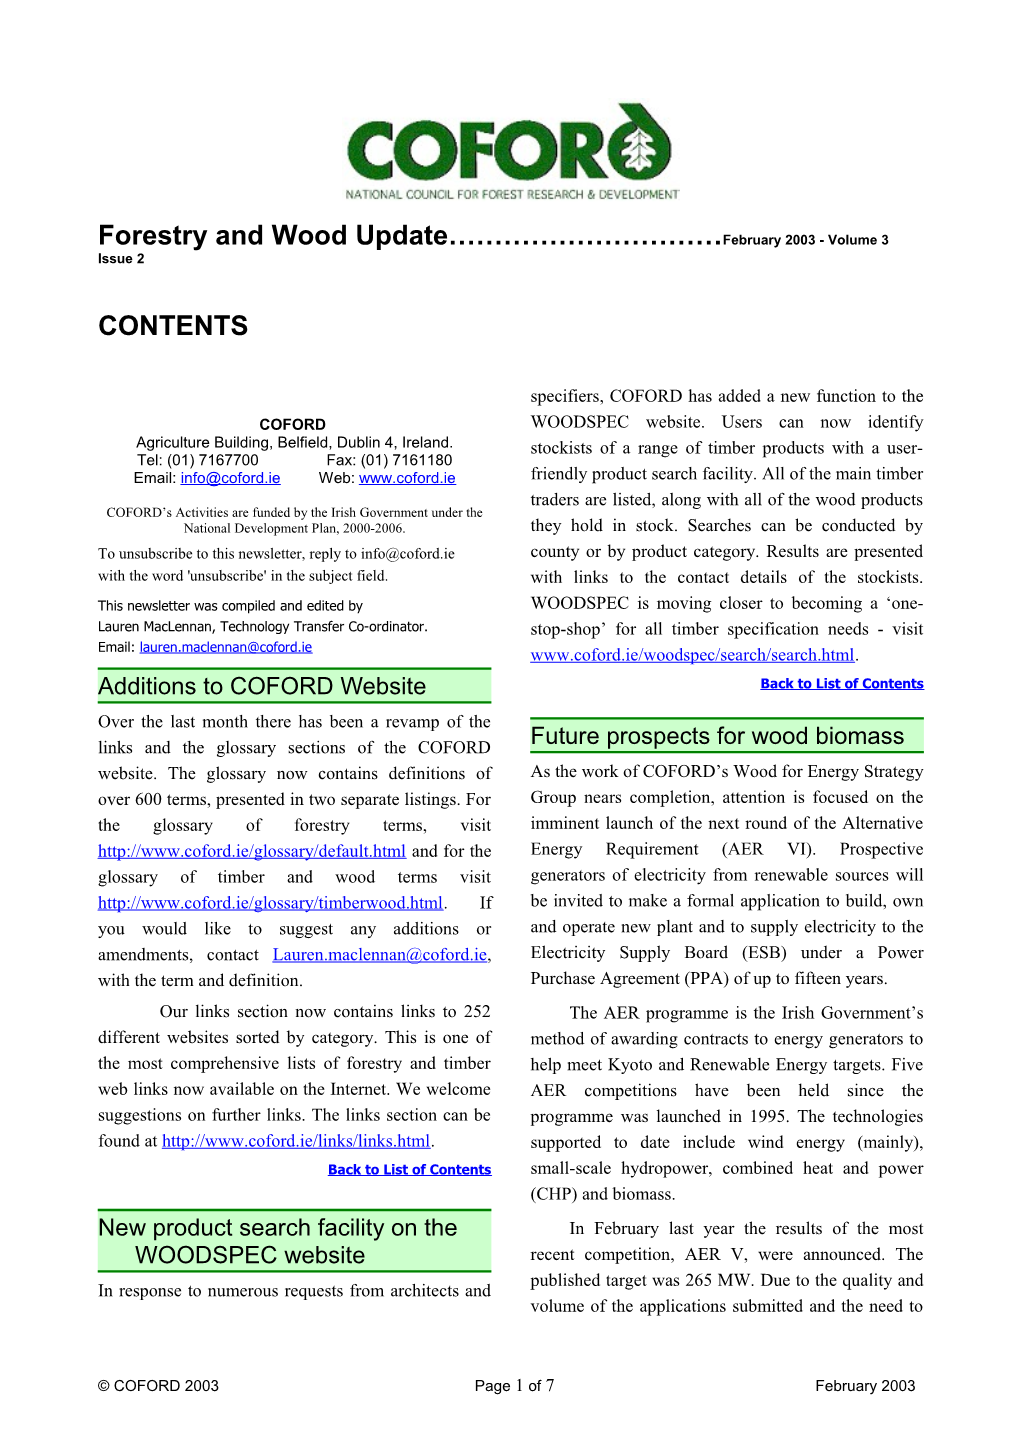 Forestry and Wood Update February 2003 - Volume 3 Issue 2